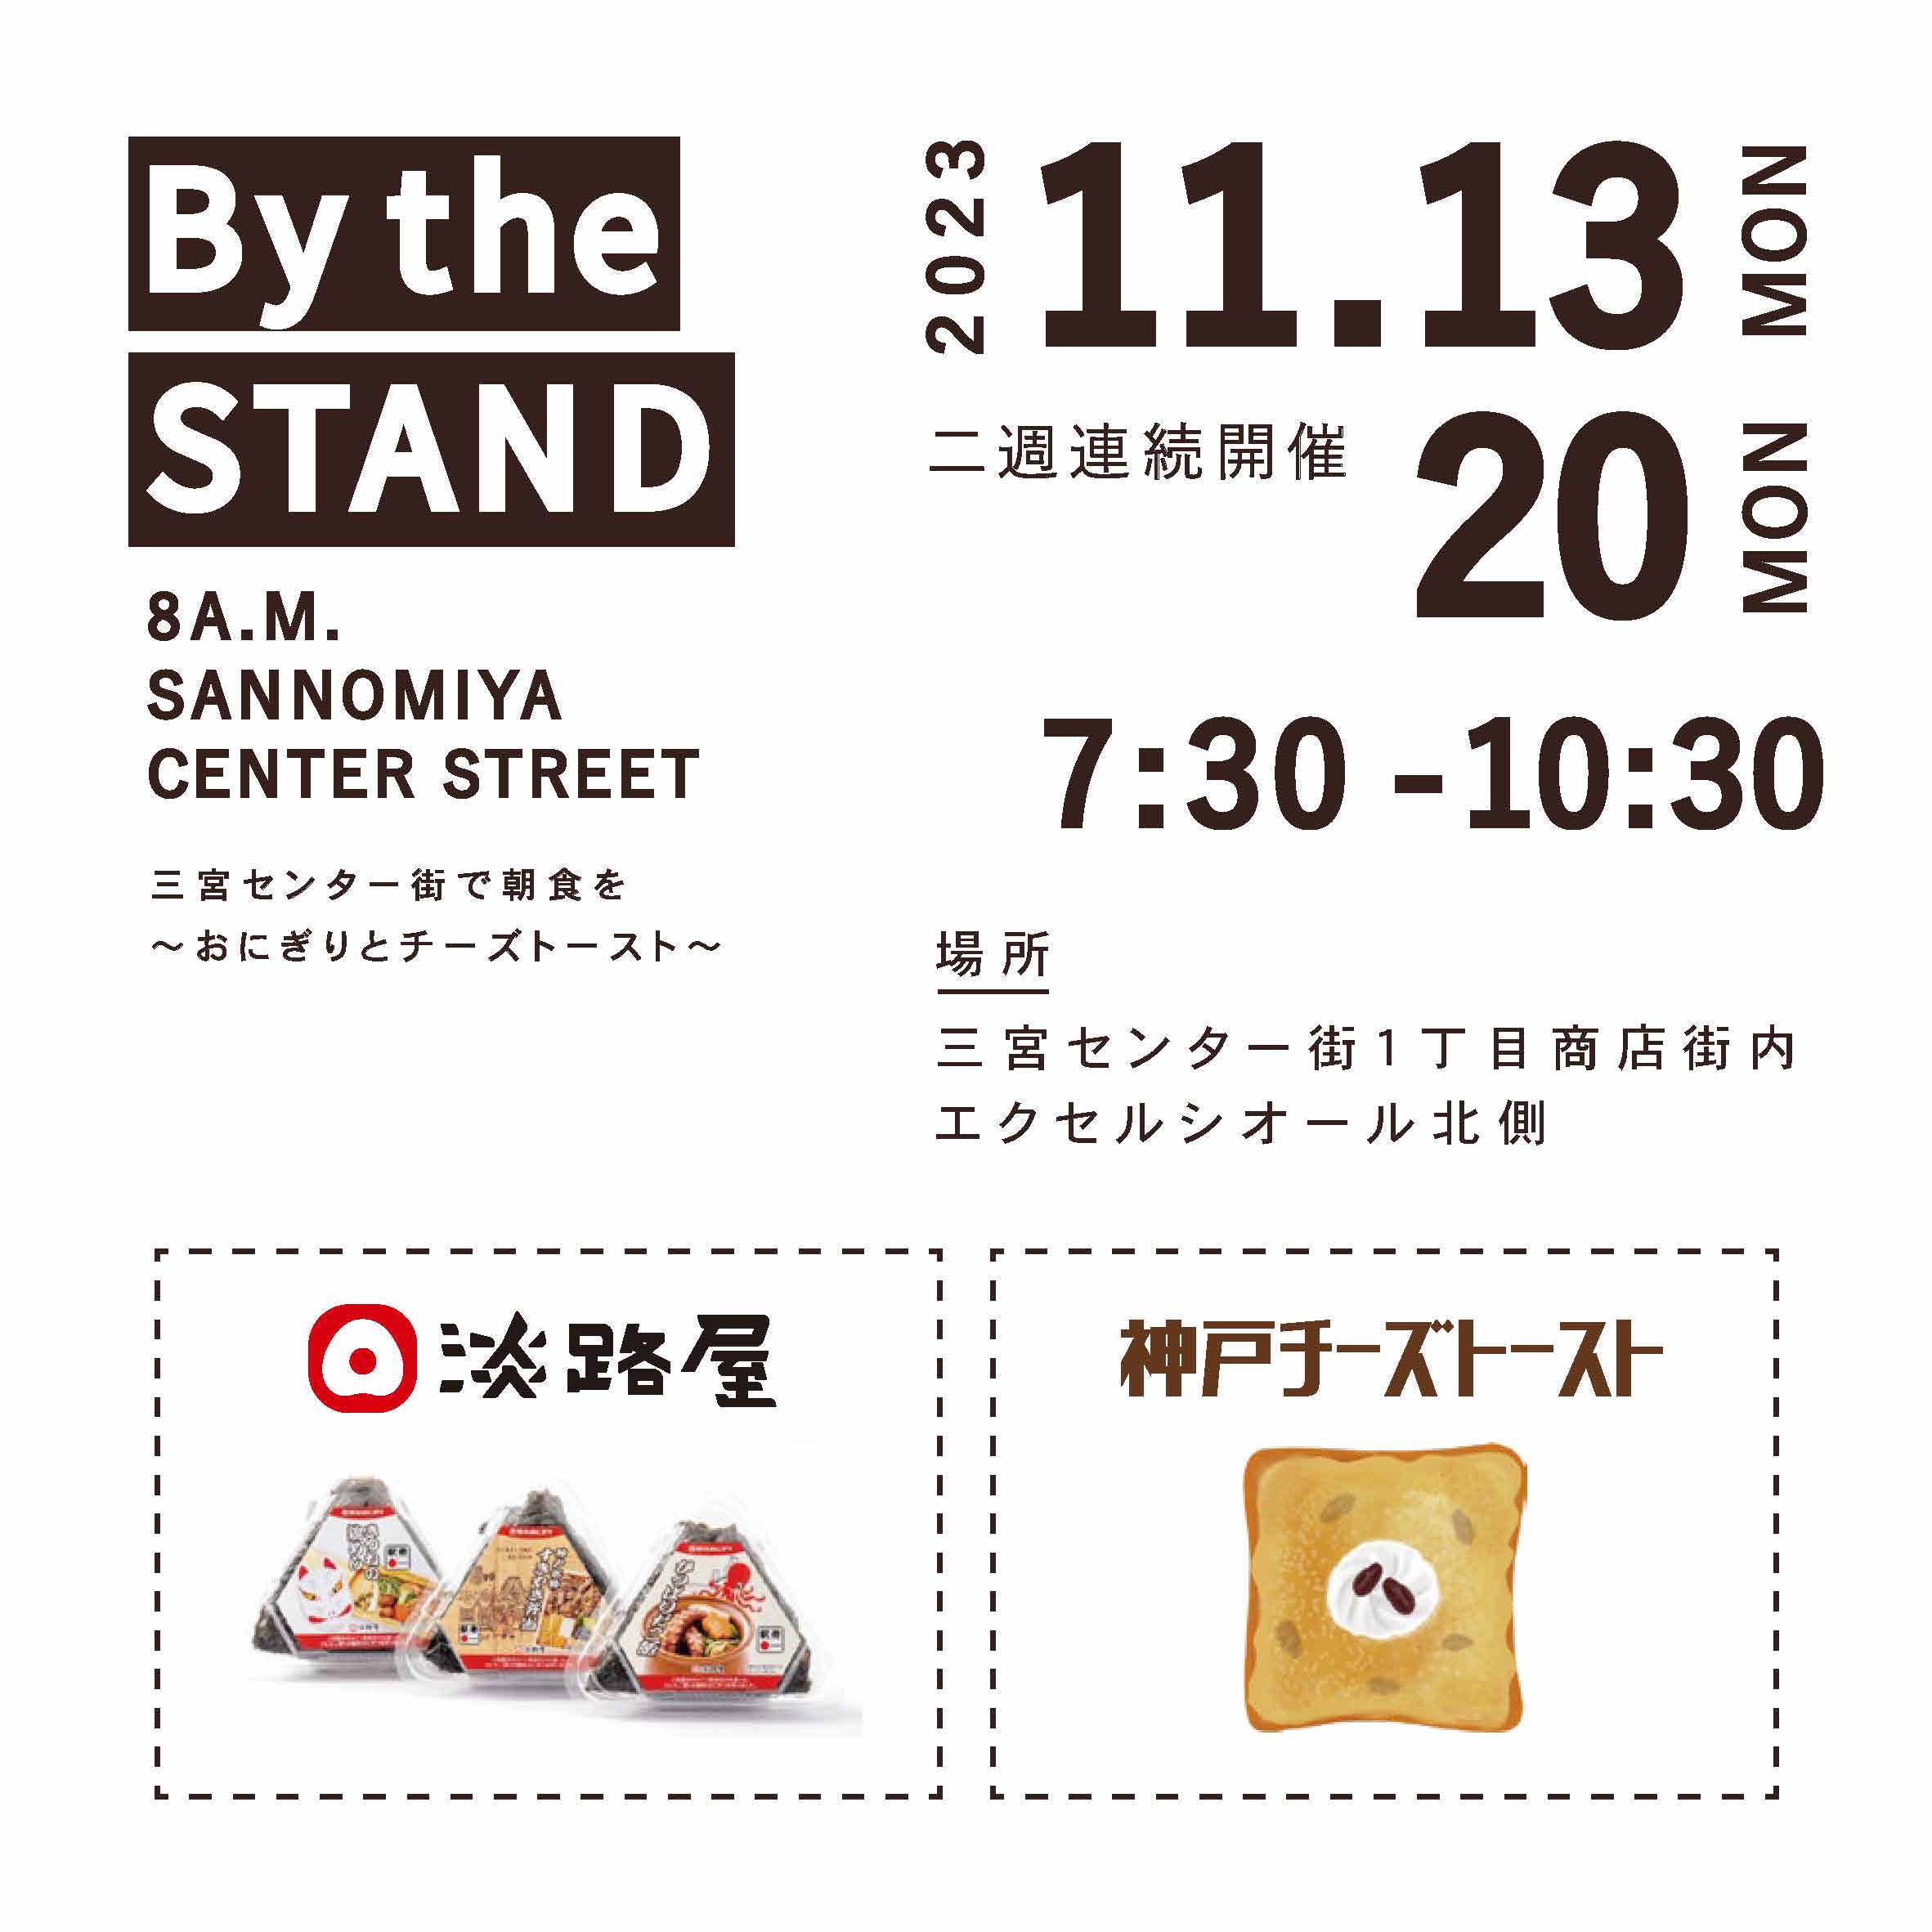 11/13・20　7:30〜10:30　By the STAND開催！